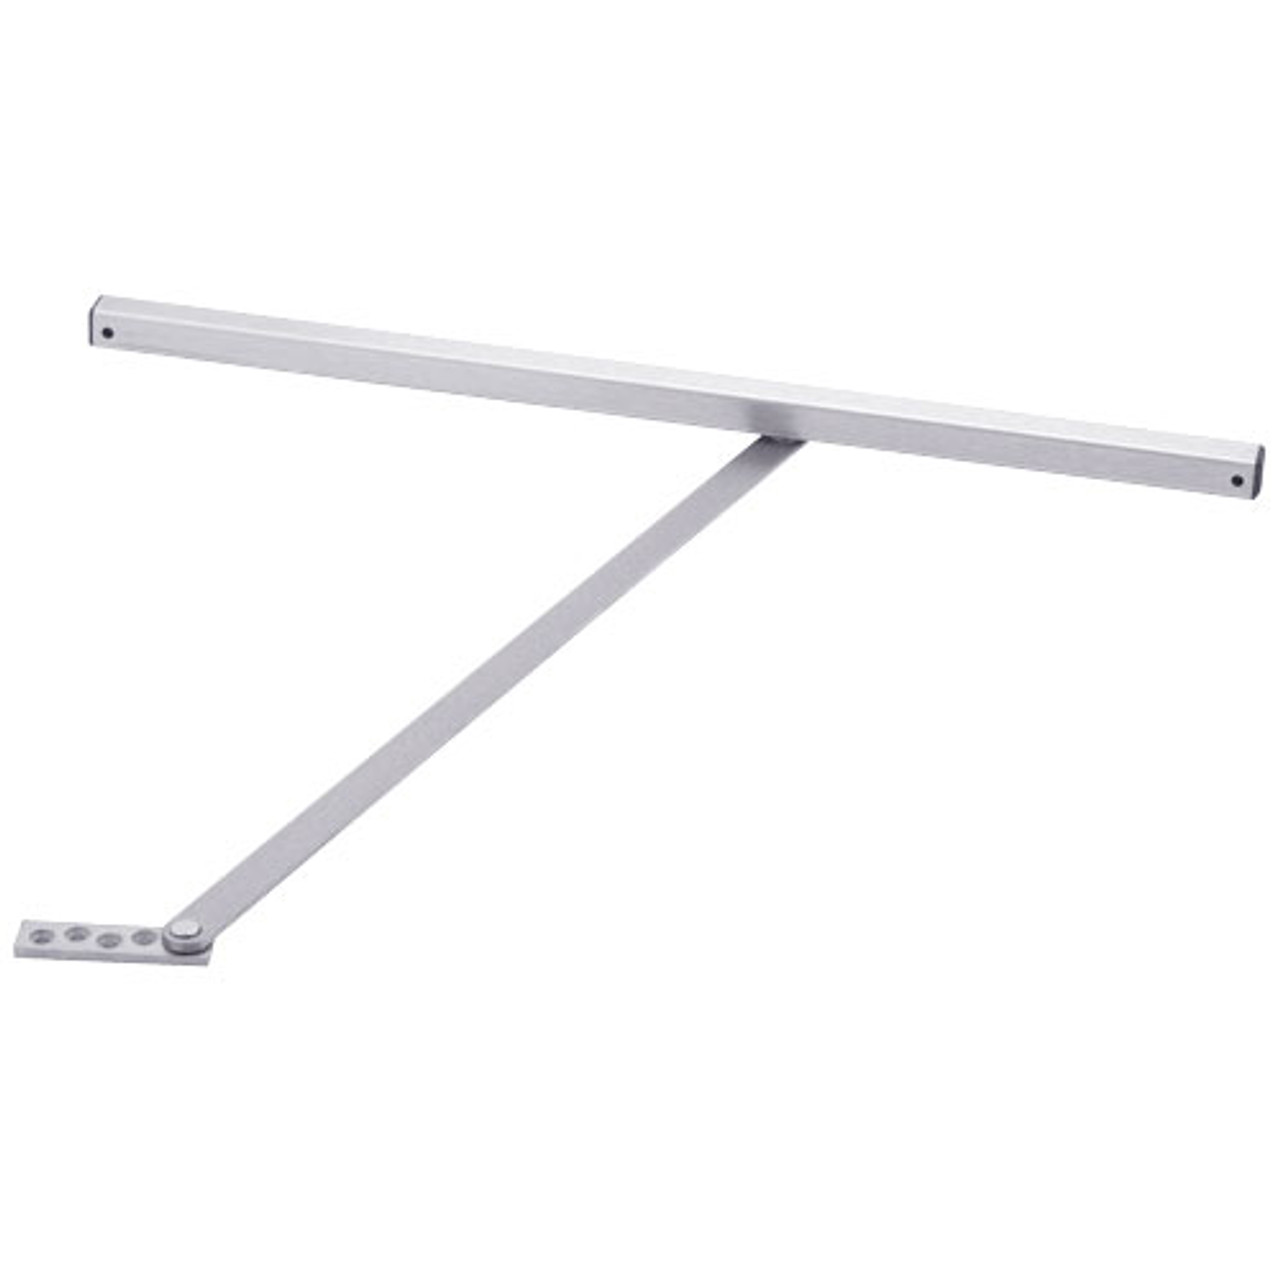 453S-US32-SHIM-3 Glynn Johnson 450 Series Medium Duty Surface Overhead in Polished stainless steel